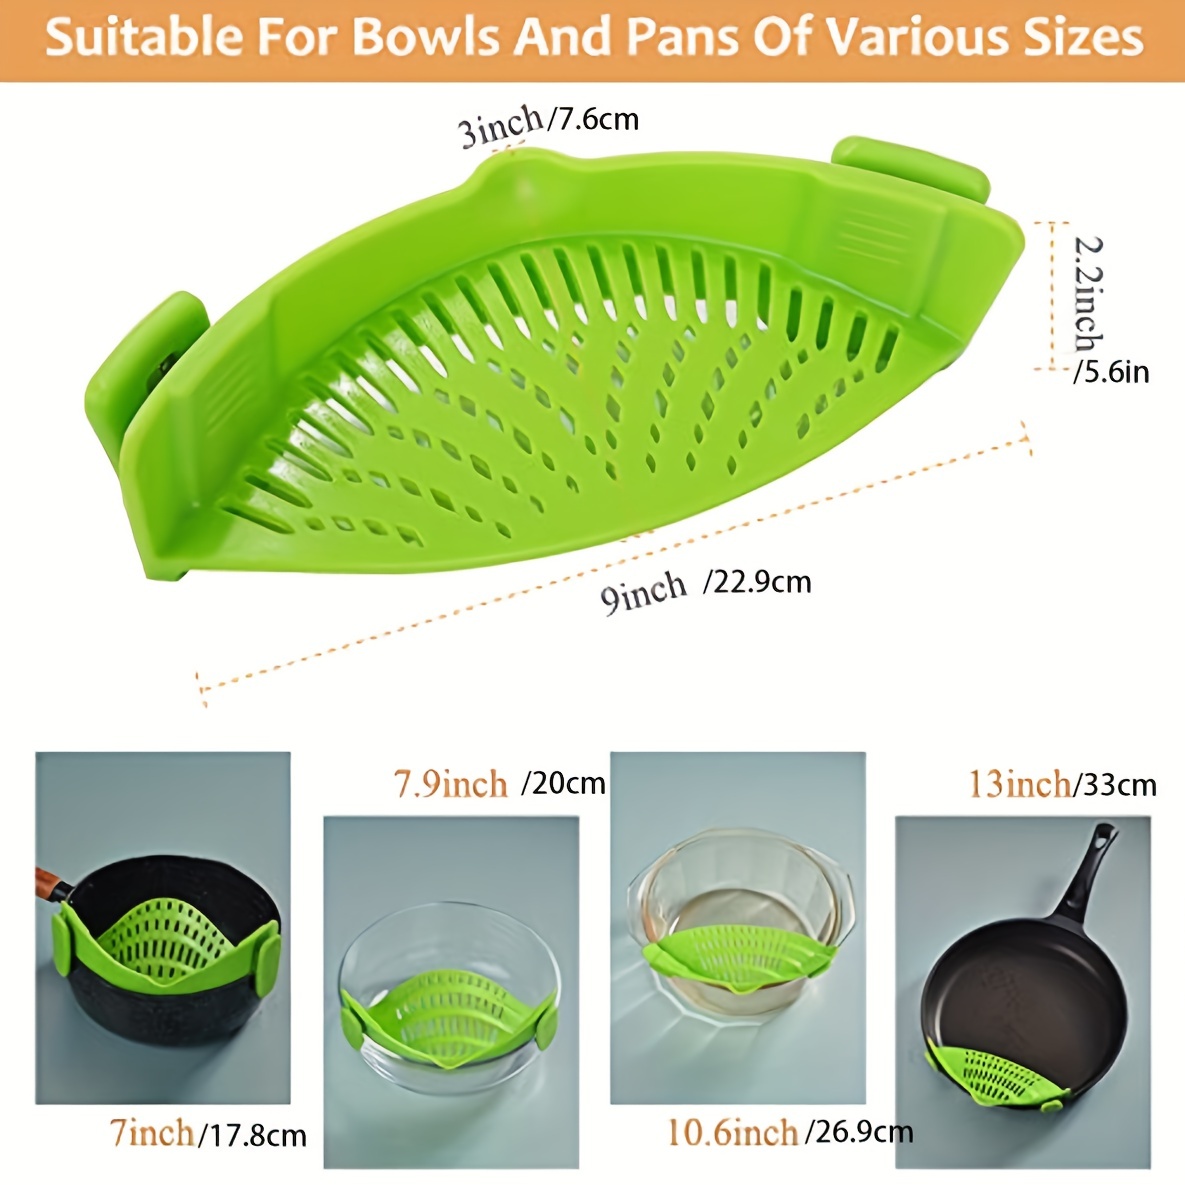  Clip On Pasta Strainer Silicone - Universal Fit for all Pots  and Bowls, Snap On Drainer for Pasta, Meat, Vegetables, Fruit, Silicone  Colander for Kitchen, Easily Drain Food